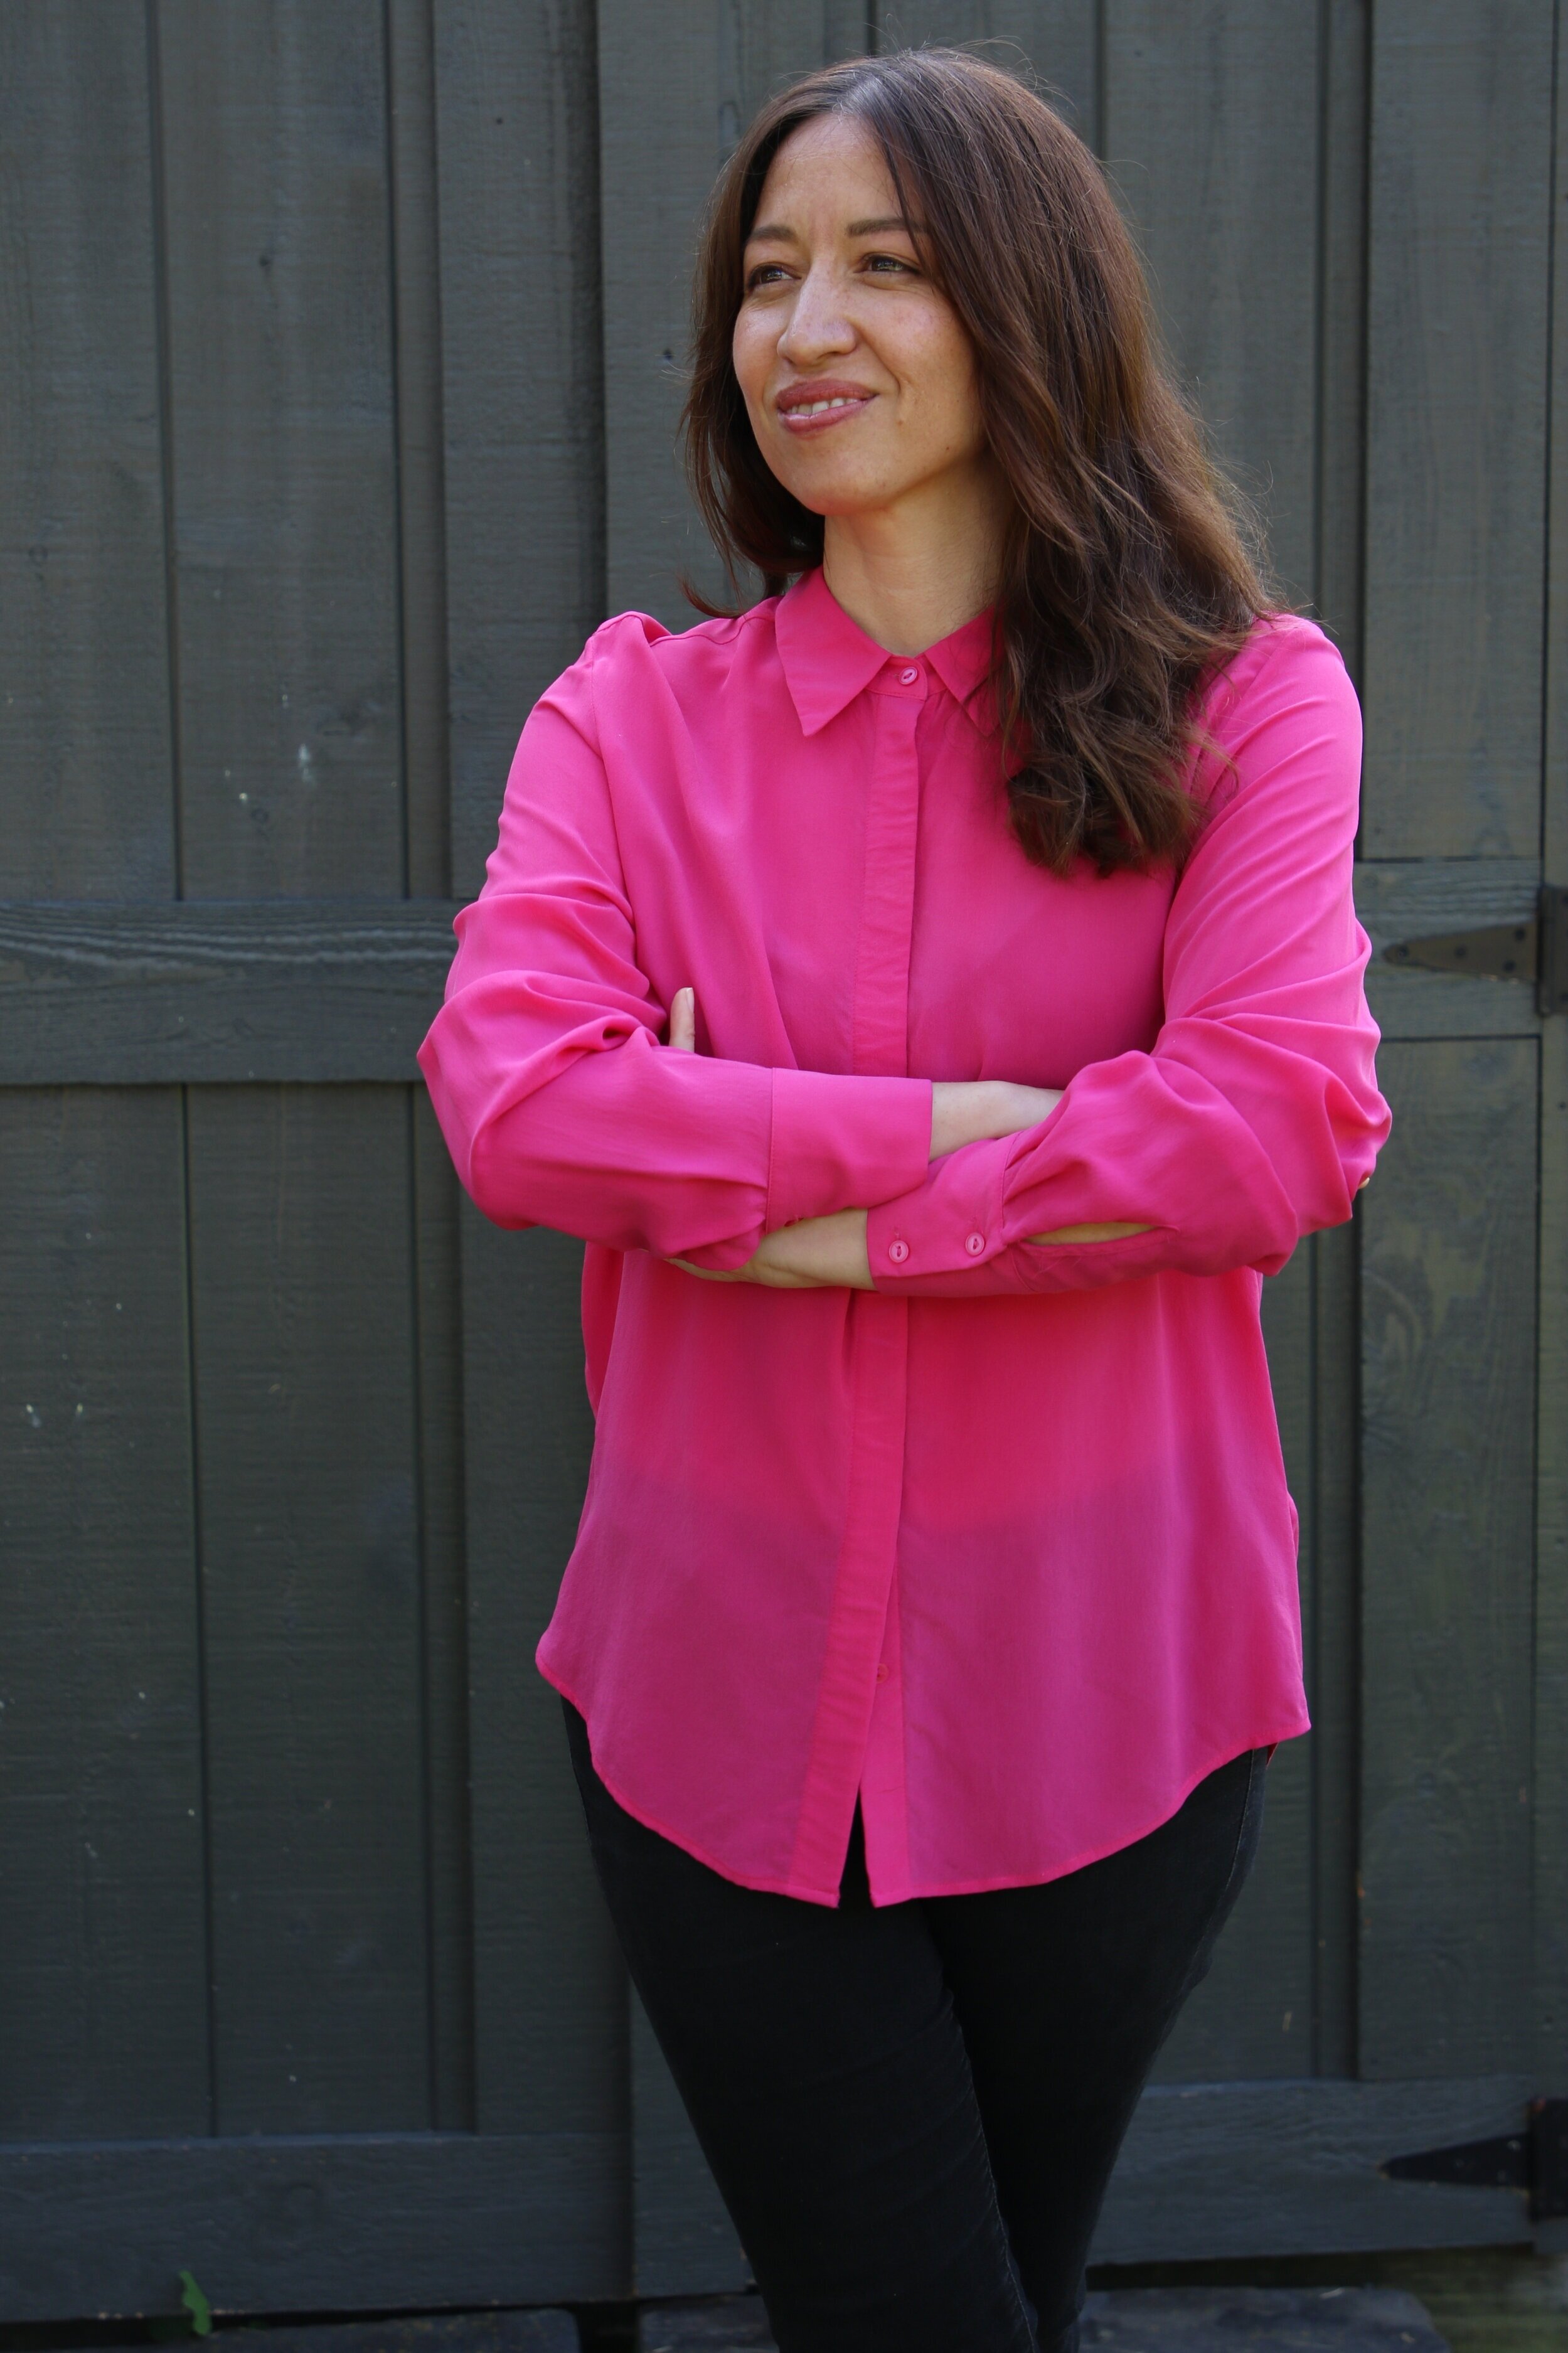 Alt text: a young asian american woman smiles confidently while looking off camera. She has medium-length brown hair over her shoulders and is wearing a fuschia button down blouse with black pants. He